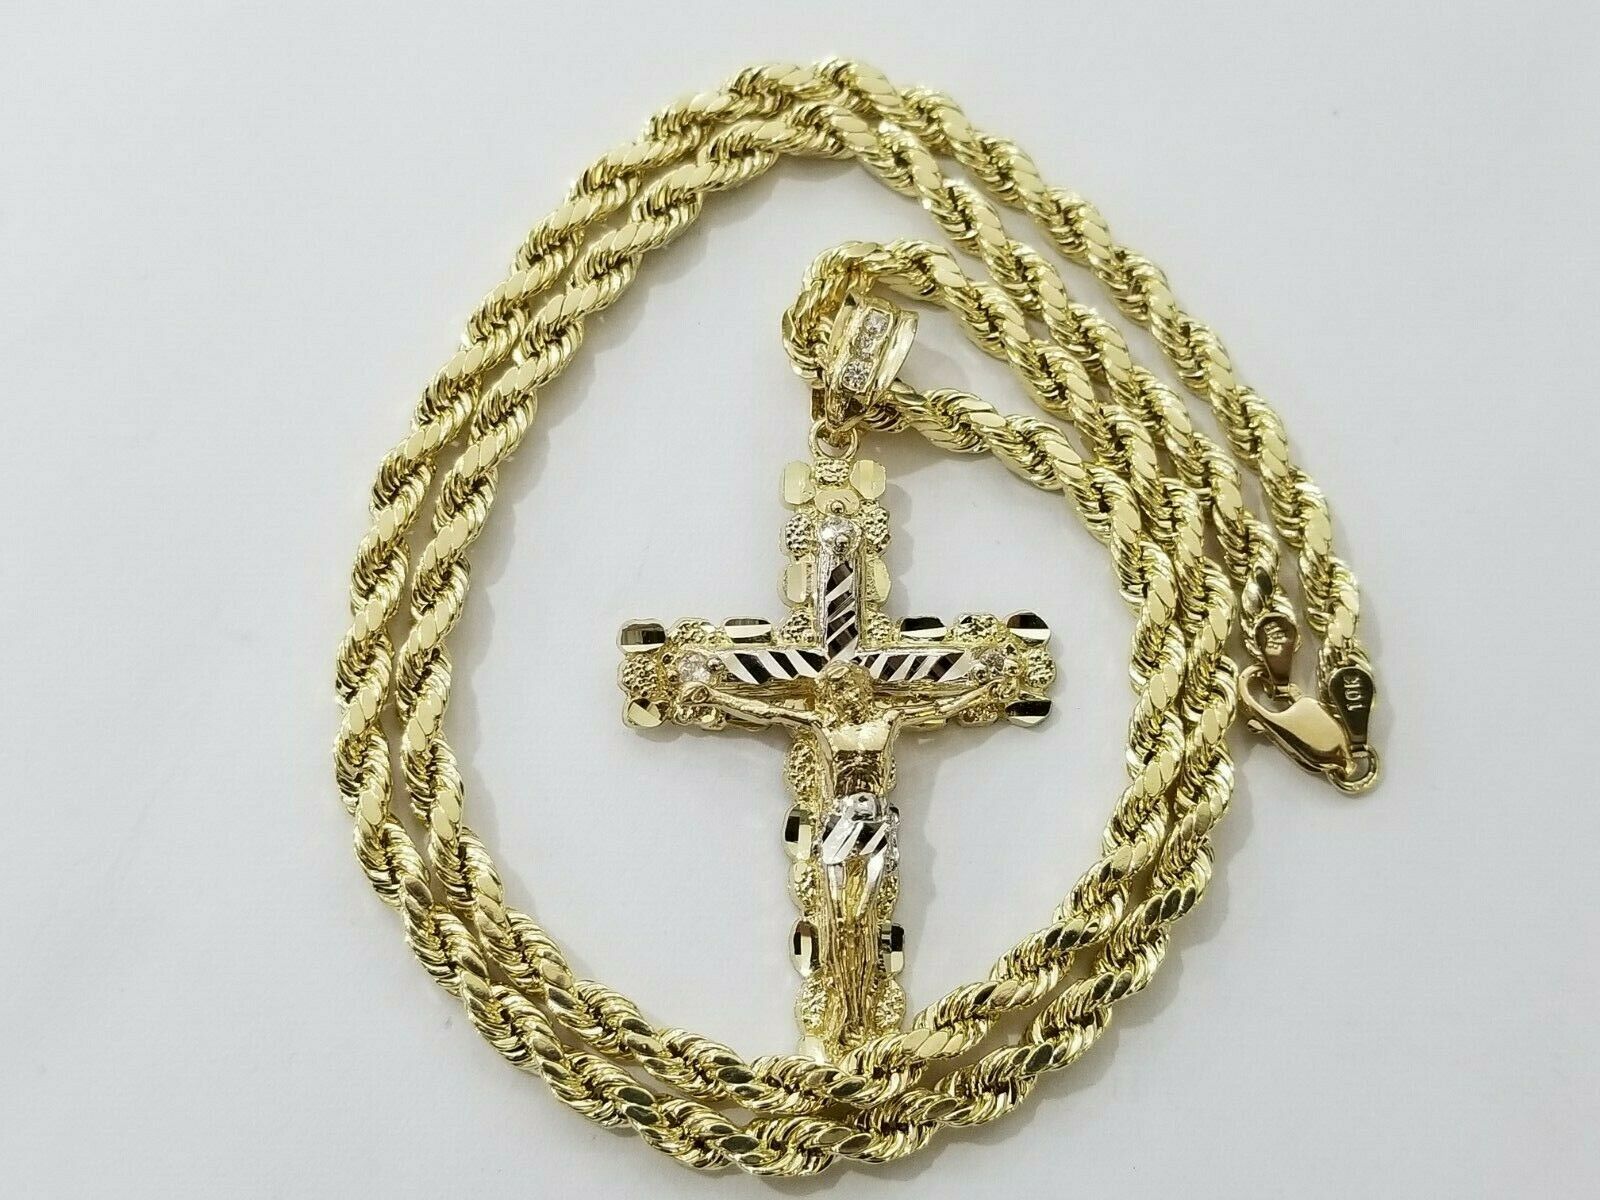 10k Yellow Gold Rope Chain With Cross Charm Pendant Set REAL 10KT 4mm Necklace